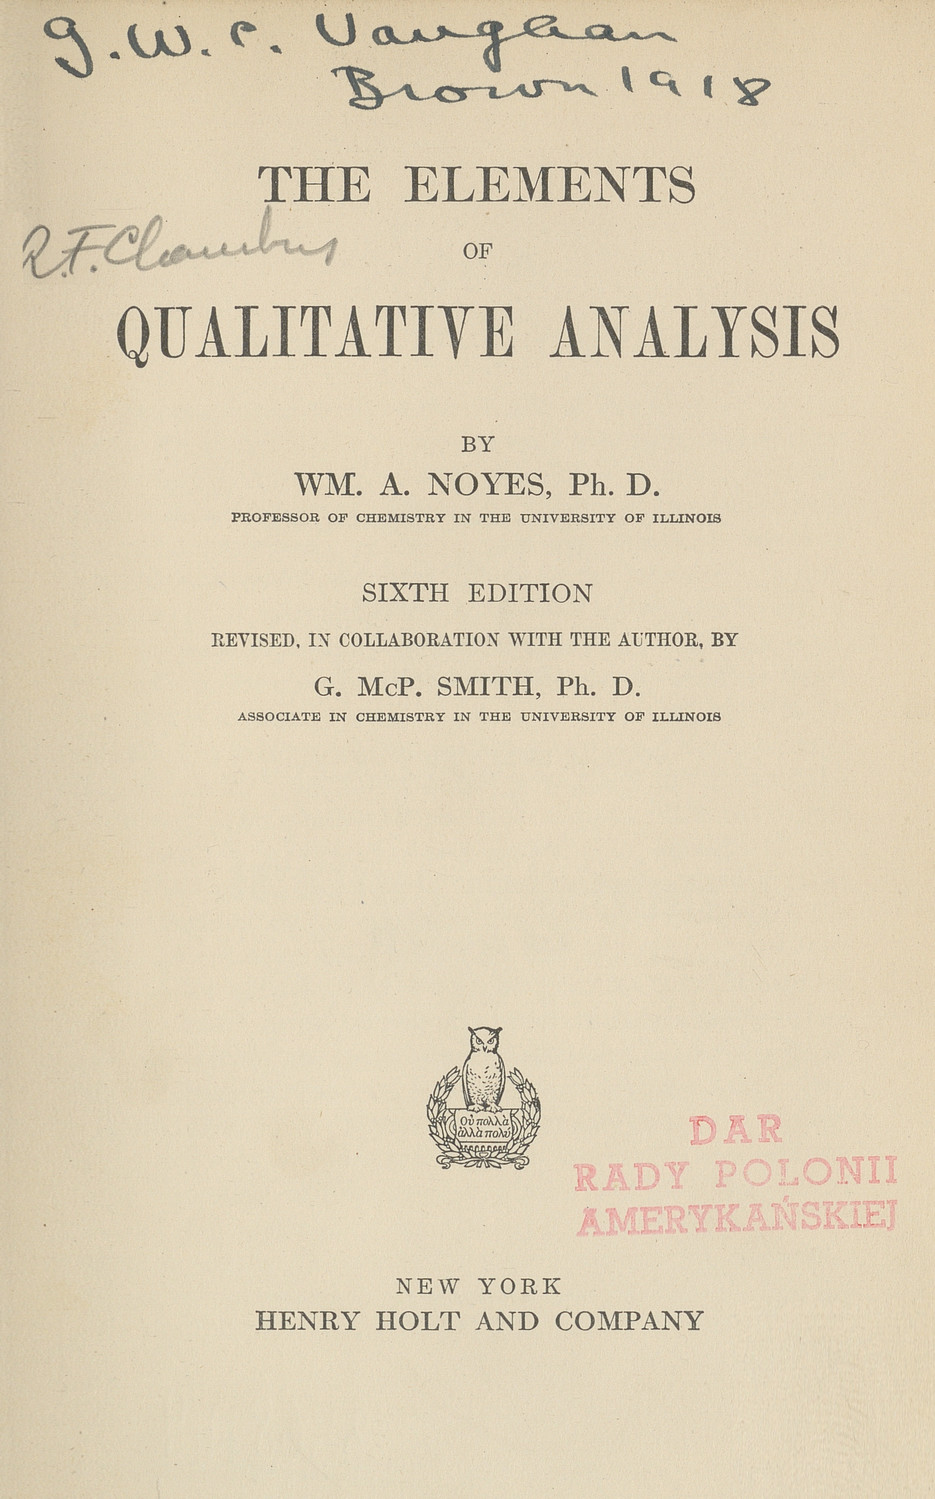 The elements of qualitative analysis